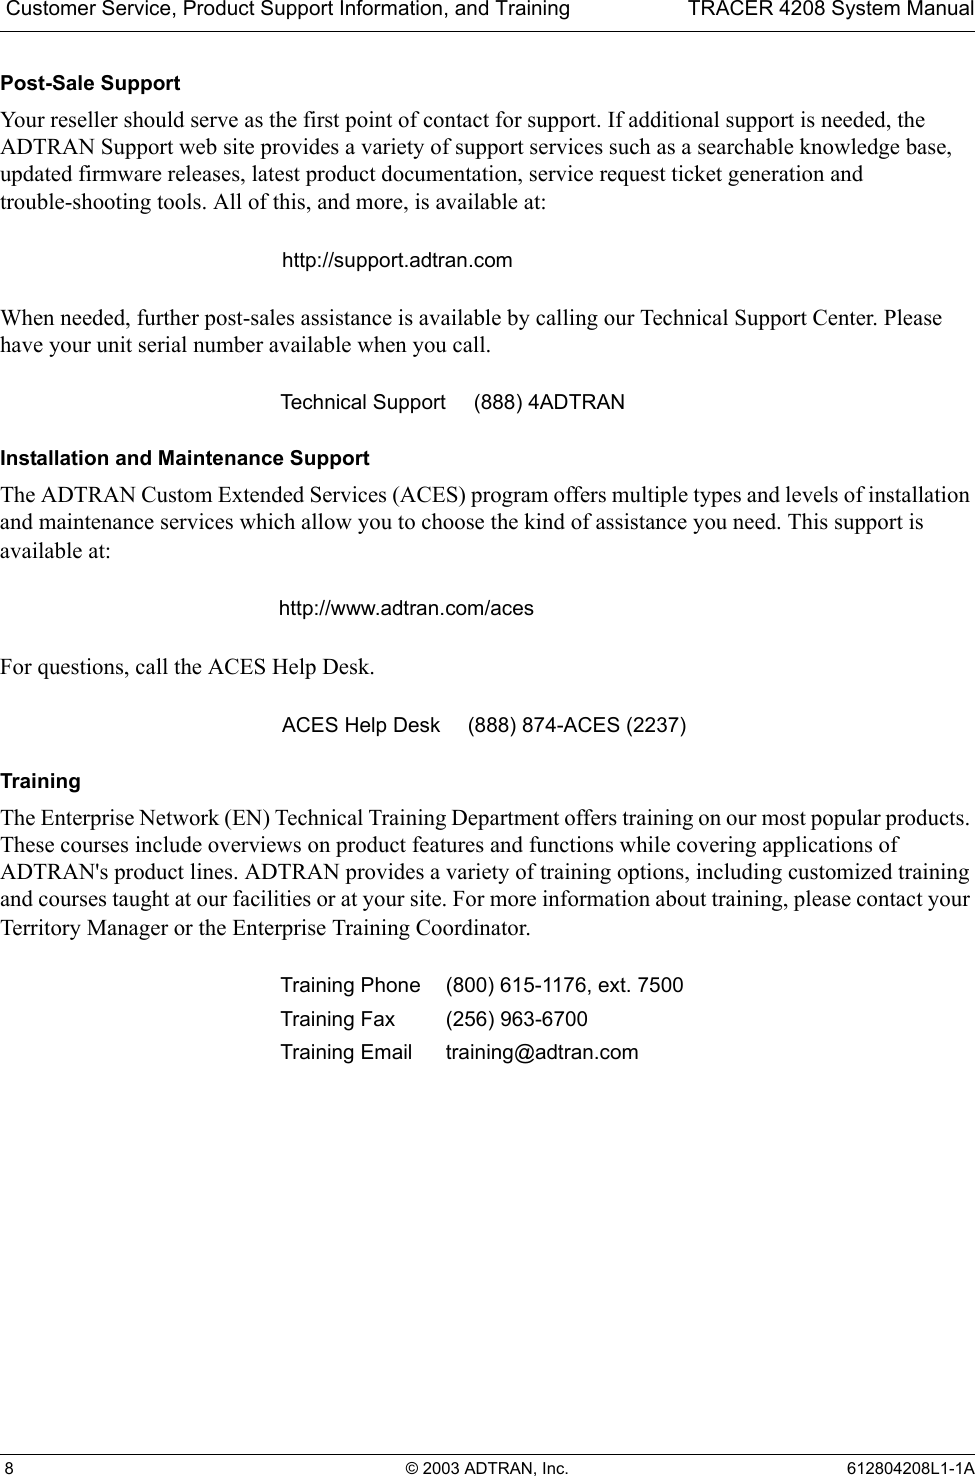  Customer Service, Product Support Information, and Training TRACER 4208 System Manual 8 © 2003 ADTRAN, Inc. 612804208L1-1APost-Sale SupportYour reseller should serve as the first point of contact for support. If additional support is needed, the ADTRAN Support web site provides a variety of support services such as a searchable knowledge base, updated firmware releases, latest product documentation, service request ticket generation and trouble-shooting tools. All of this, and more, is available at:When needed, further post-sales assistance is available by calling our Technical Support Center. Please have your unit serial number available when you call.Installation and Maintenance SupportThe ADTRAN Custom Extended Services (ACES) program offers multiple types and levels of installation and maintenance services which allow you to choose the kind of assistance you need. This support is available at:For questions, call the ACES Help Desk. TrainingThe Enterprise Network (EN) Technical Training Department offers training on our most popular products. These courses include overviews on product features and functions while covering applications of ADTRAN&apos;s product lines. ADTRAN provides a variety of training options, including customized training and courses taught at our facilities or at your site. For more information about training, please contact your Territory Manager or the Enterprise Training Coordinator.http://support.adtran.comTechnical Support (888) 4ADTRANhttp://www.adtran.com/acesACES Help Desk (888) 874-ACES (2237) Training Phone (800) 615-1176, ext. 7500 Training Fax (256) 963-6700Training Email training@adtran.com